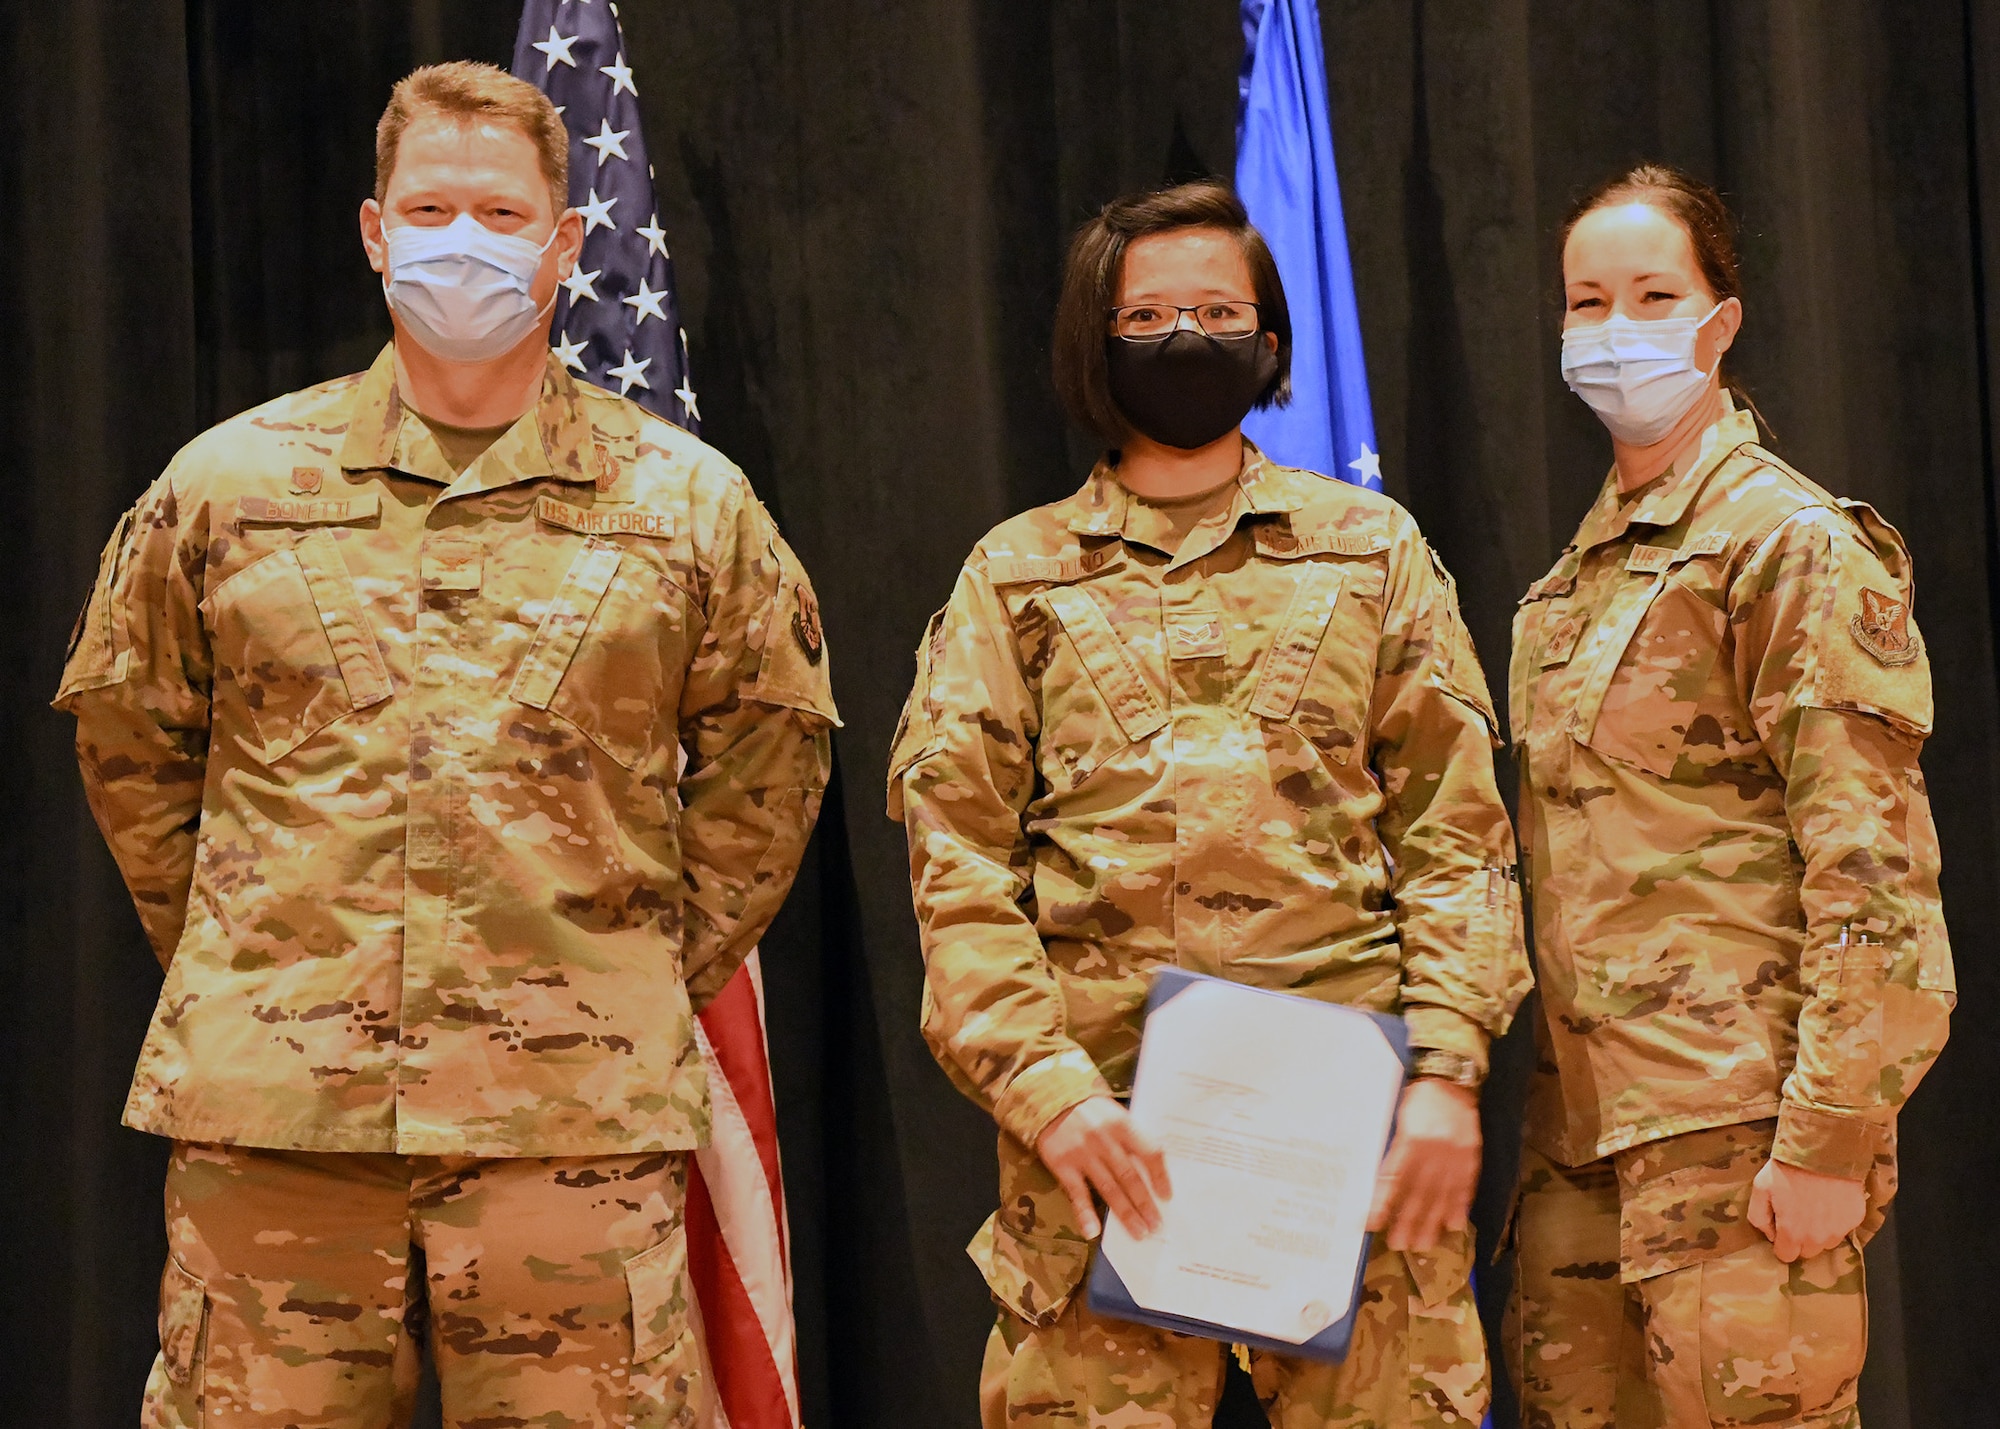 Colonel Peter Bonetti, 90th Missile Wing Commander, and Command Chief Master Sgt. Tiffany Bettisworth, present an Airman Leadership School graduate with a certificate Nov. 5 at the Base Theater on F. E. Warren Air Force Base, Wyo.